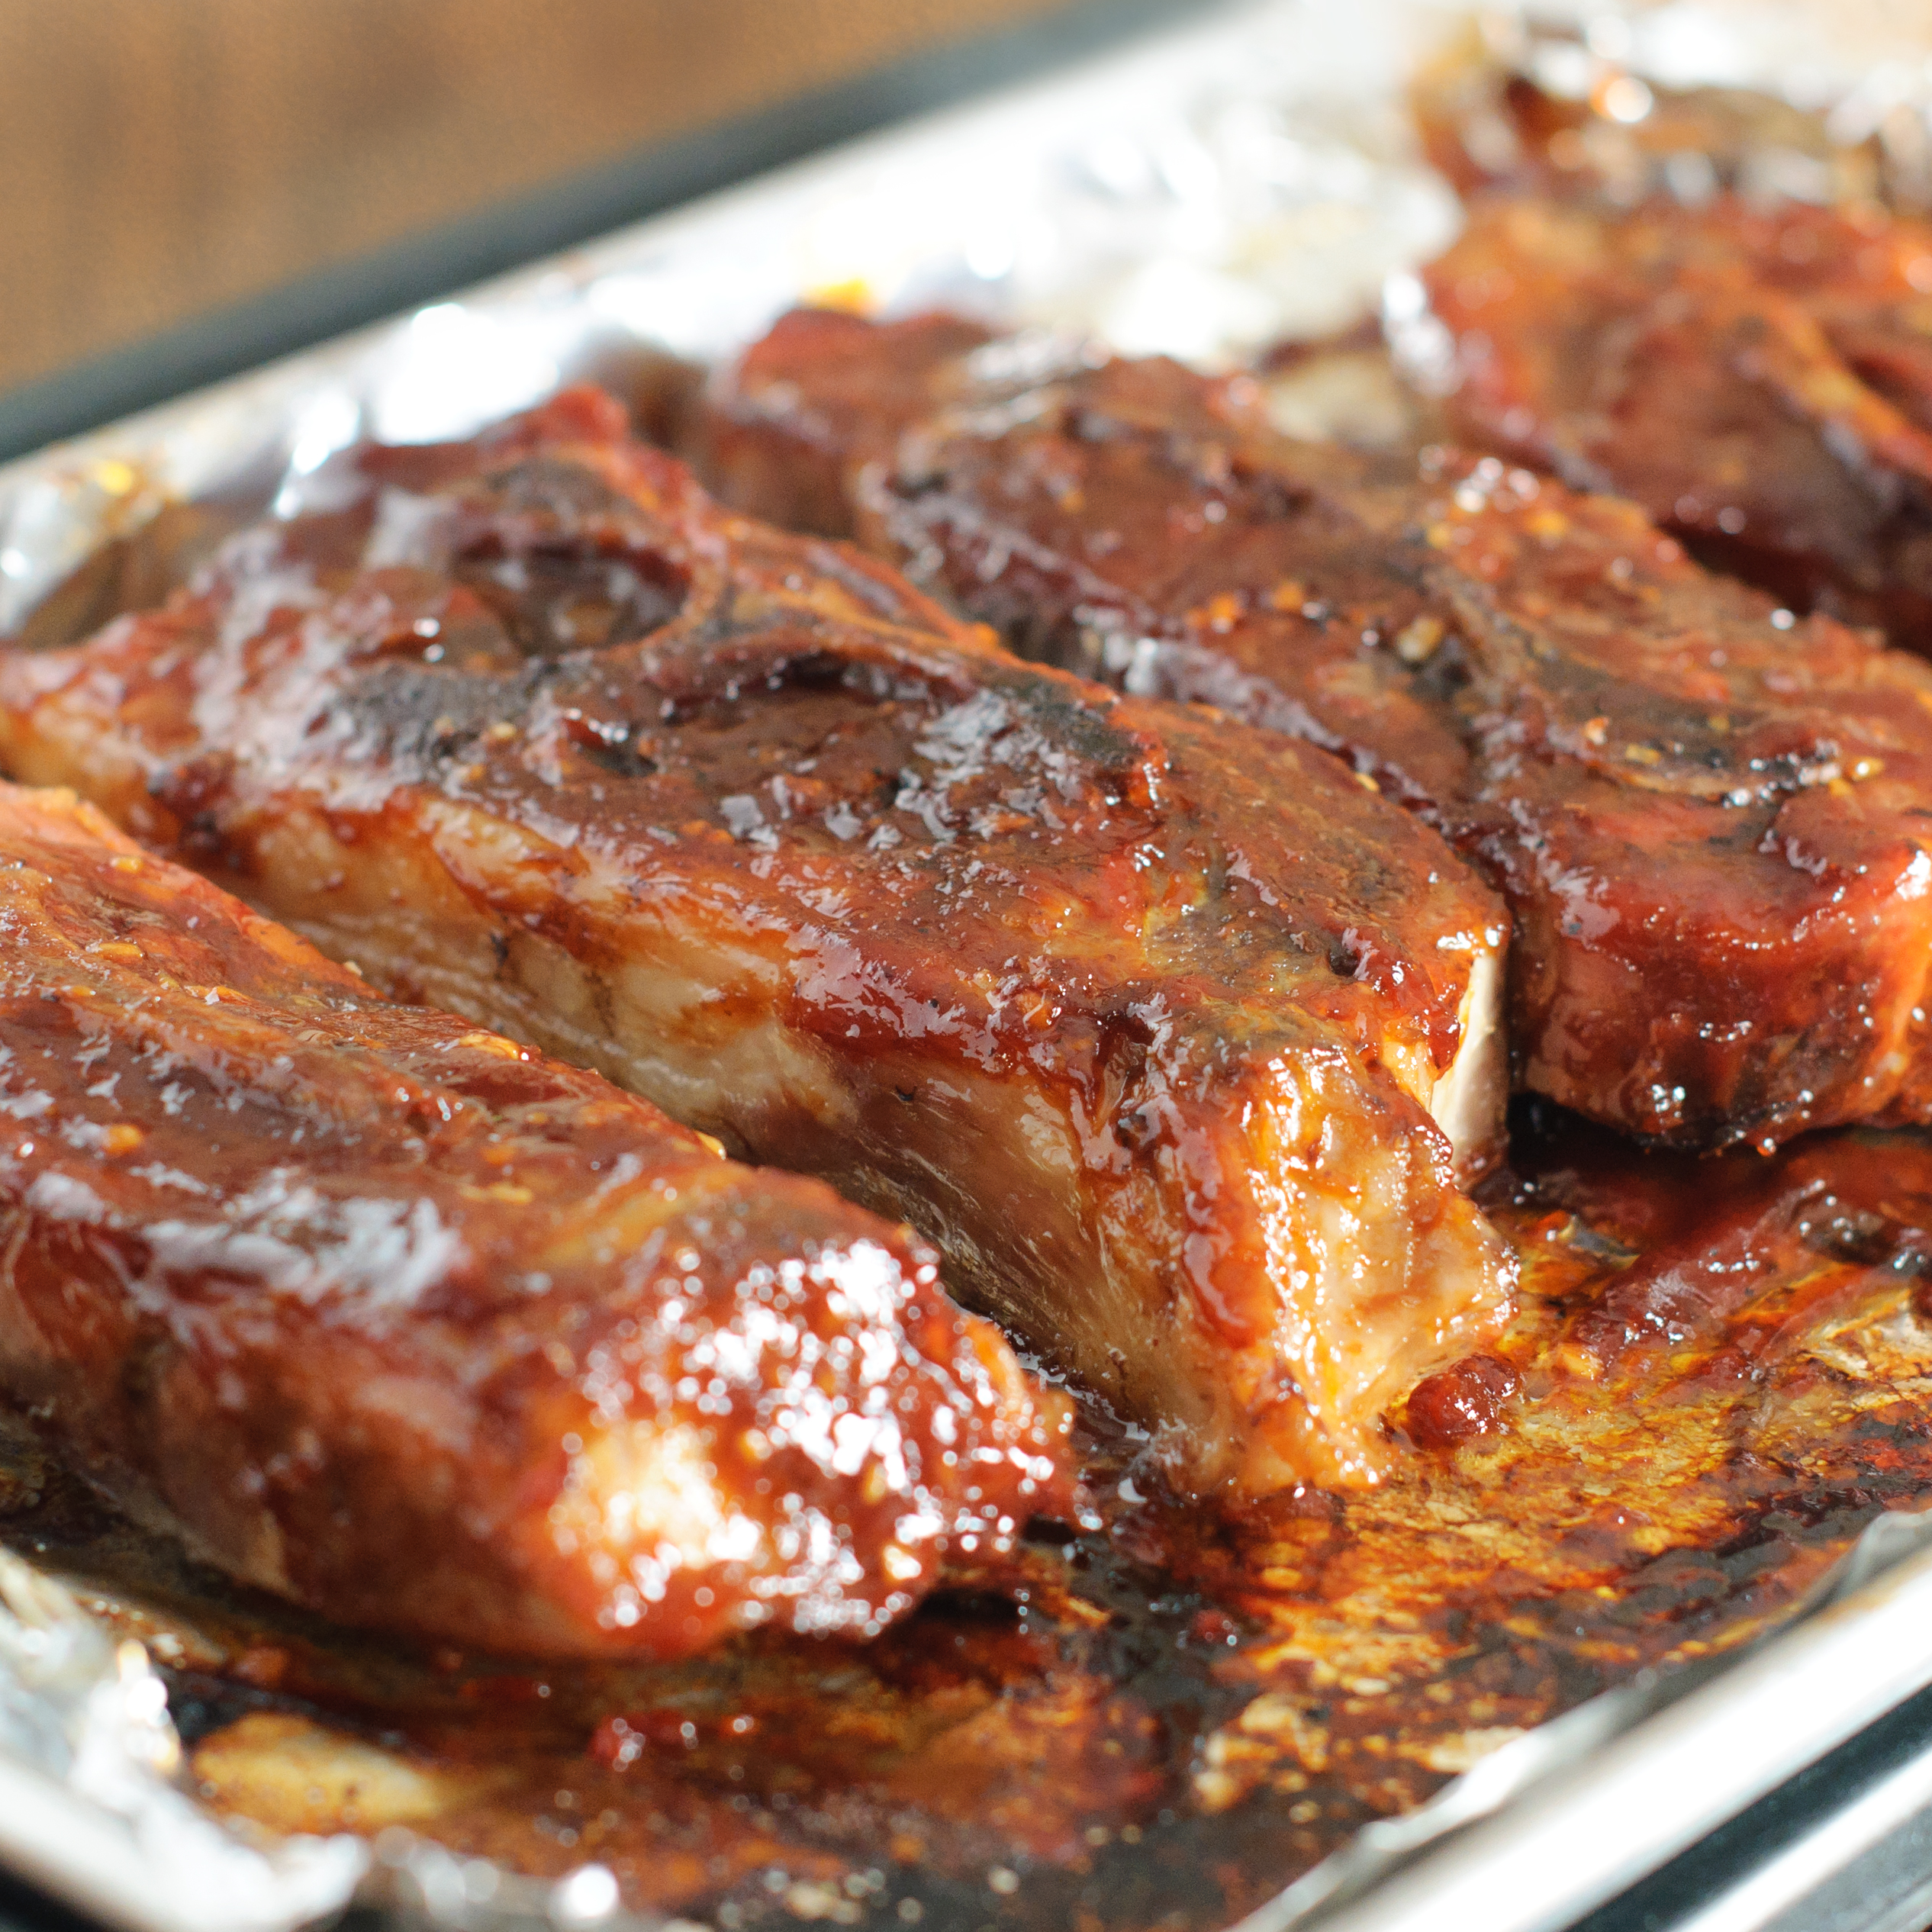 Bbq Country Style Ribs Recipe Allrecipes,Wallaby Pet Price